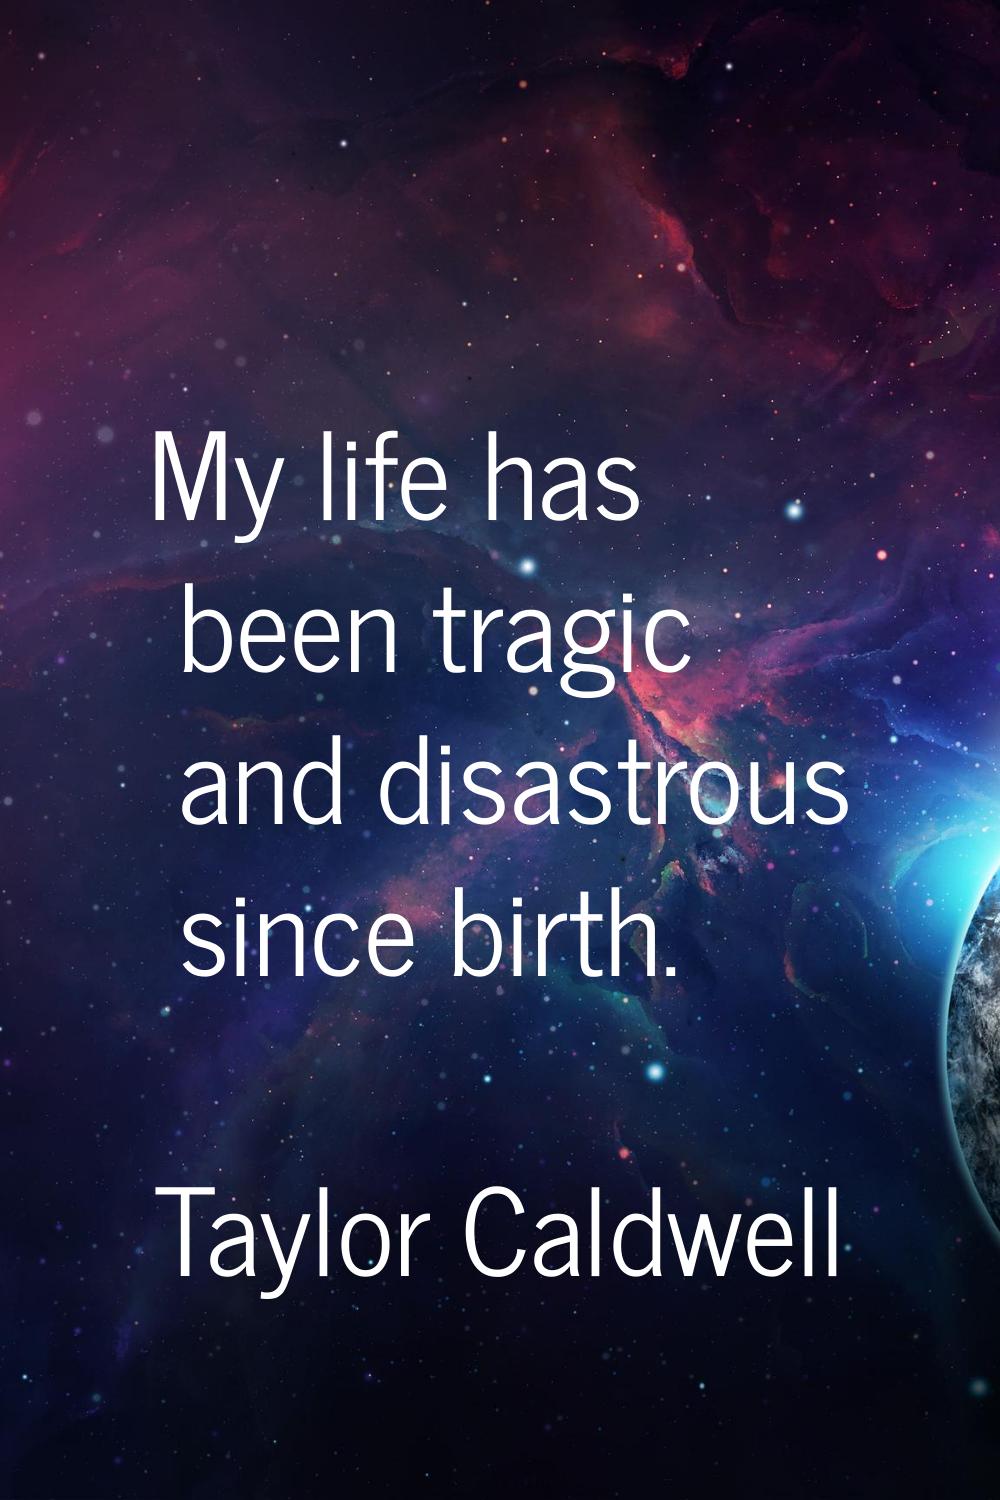 My life has been tragic and disastrous since birth.